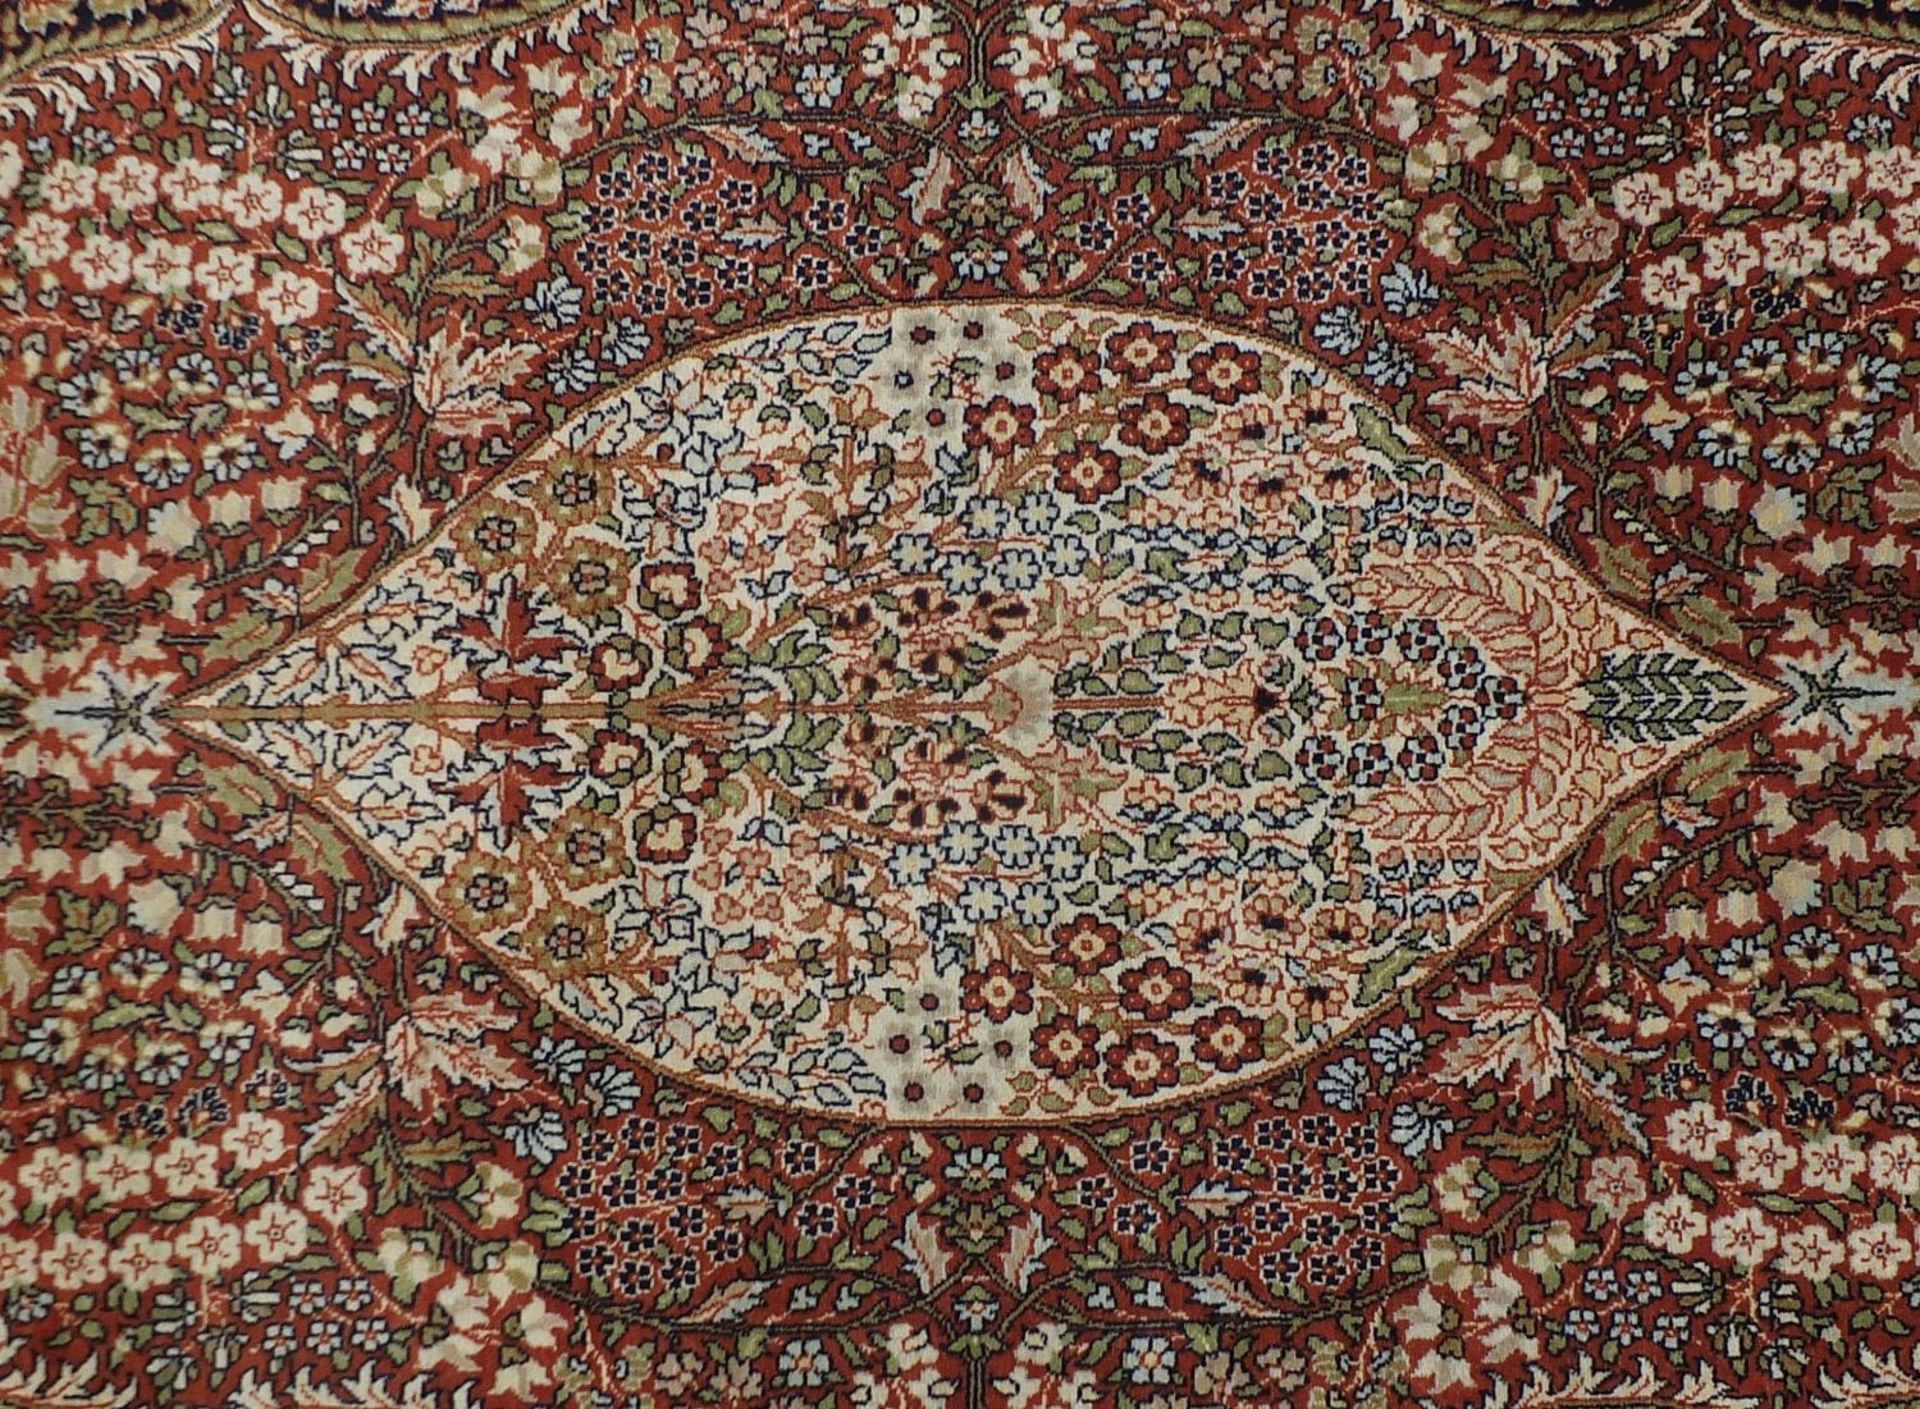 Rectangular Persian rug having an all over floral design with traditional medallion, 224cm x - Image 2 of 4